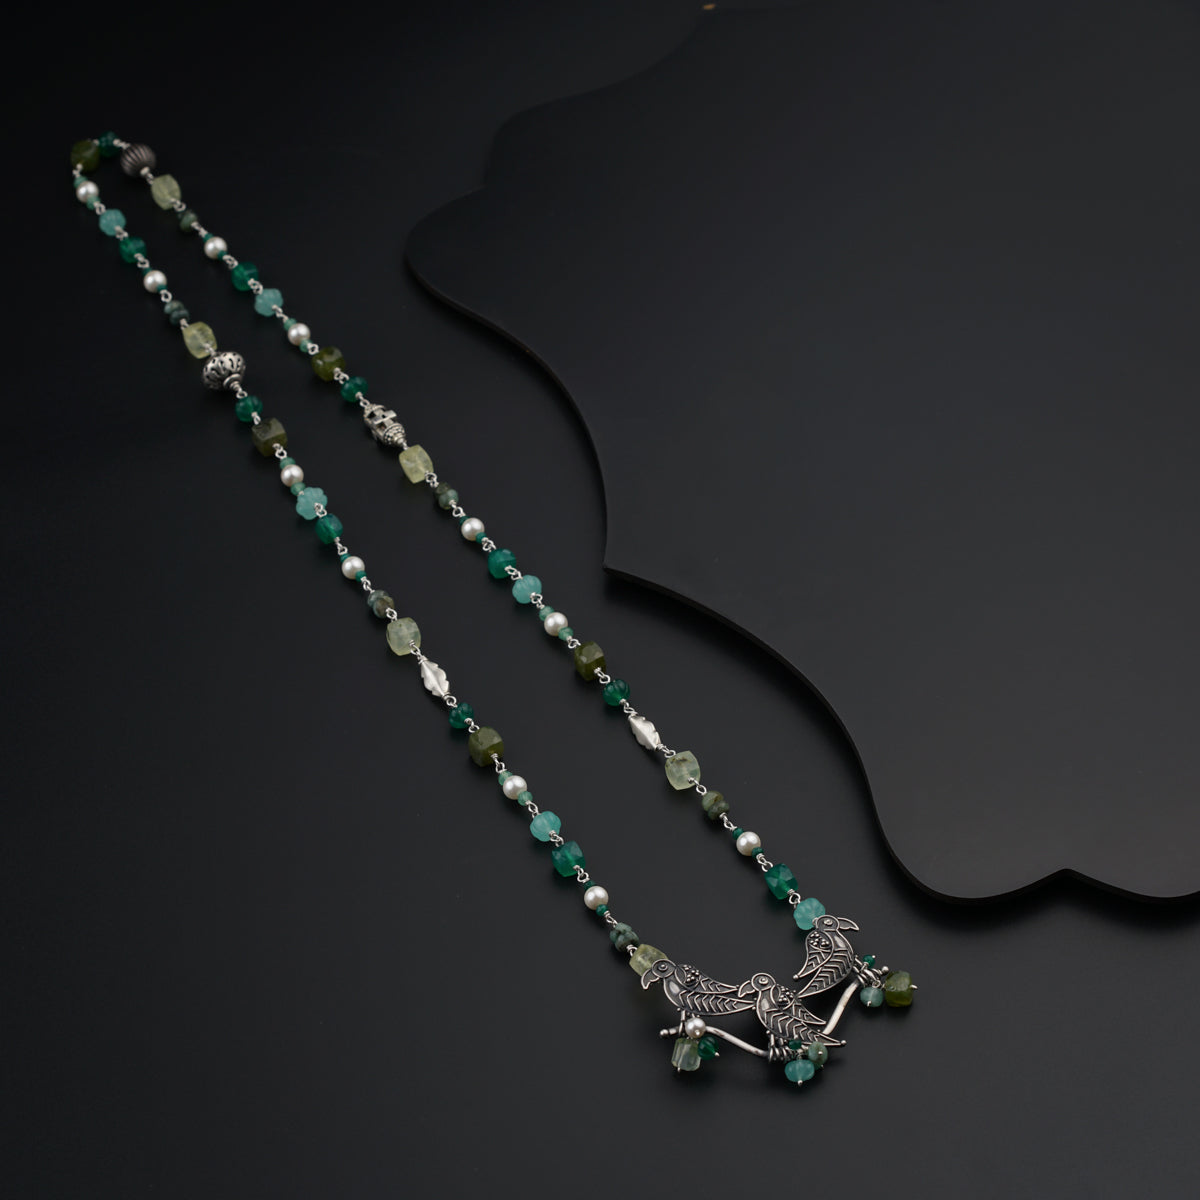 Tota Necklace with Multicolor Stones